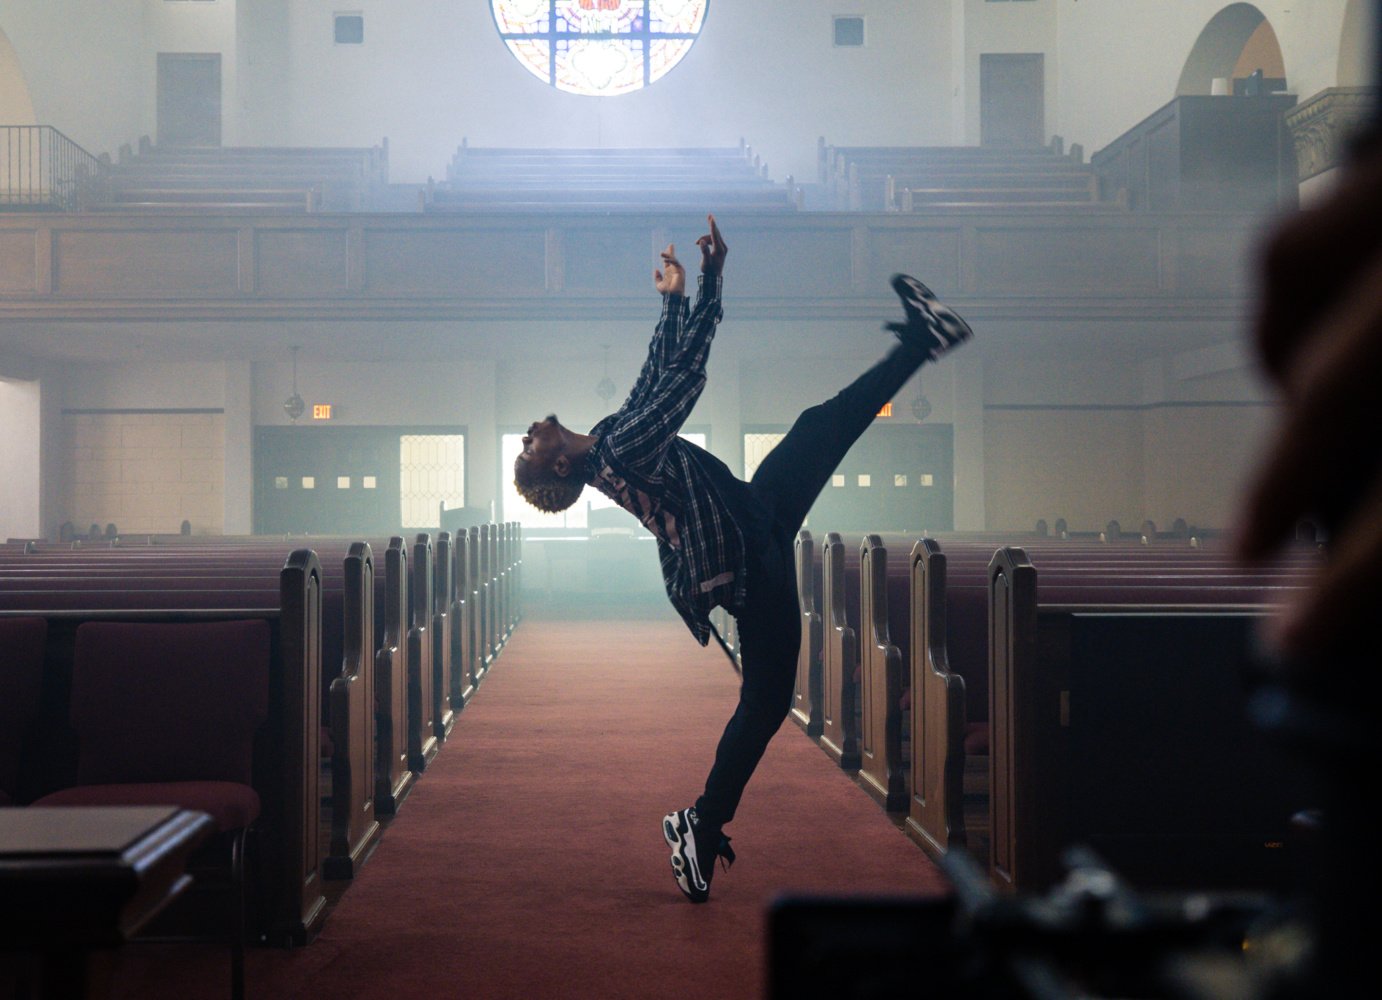 a young black man in a plaid shirt, dark pants and tennis shoes dances in-between church pews.